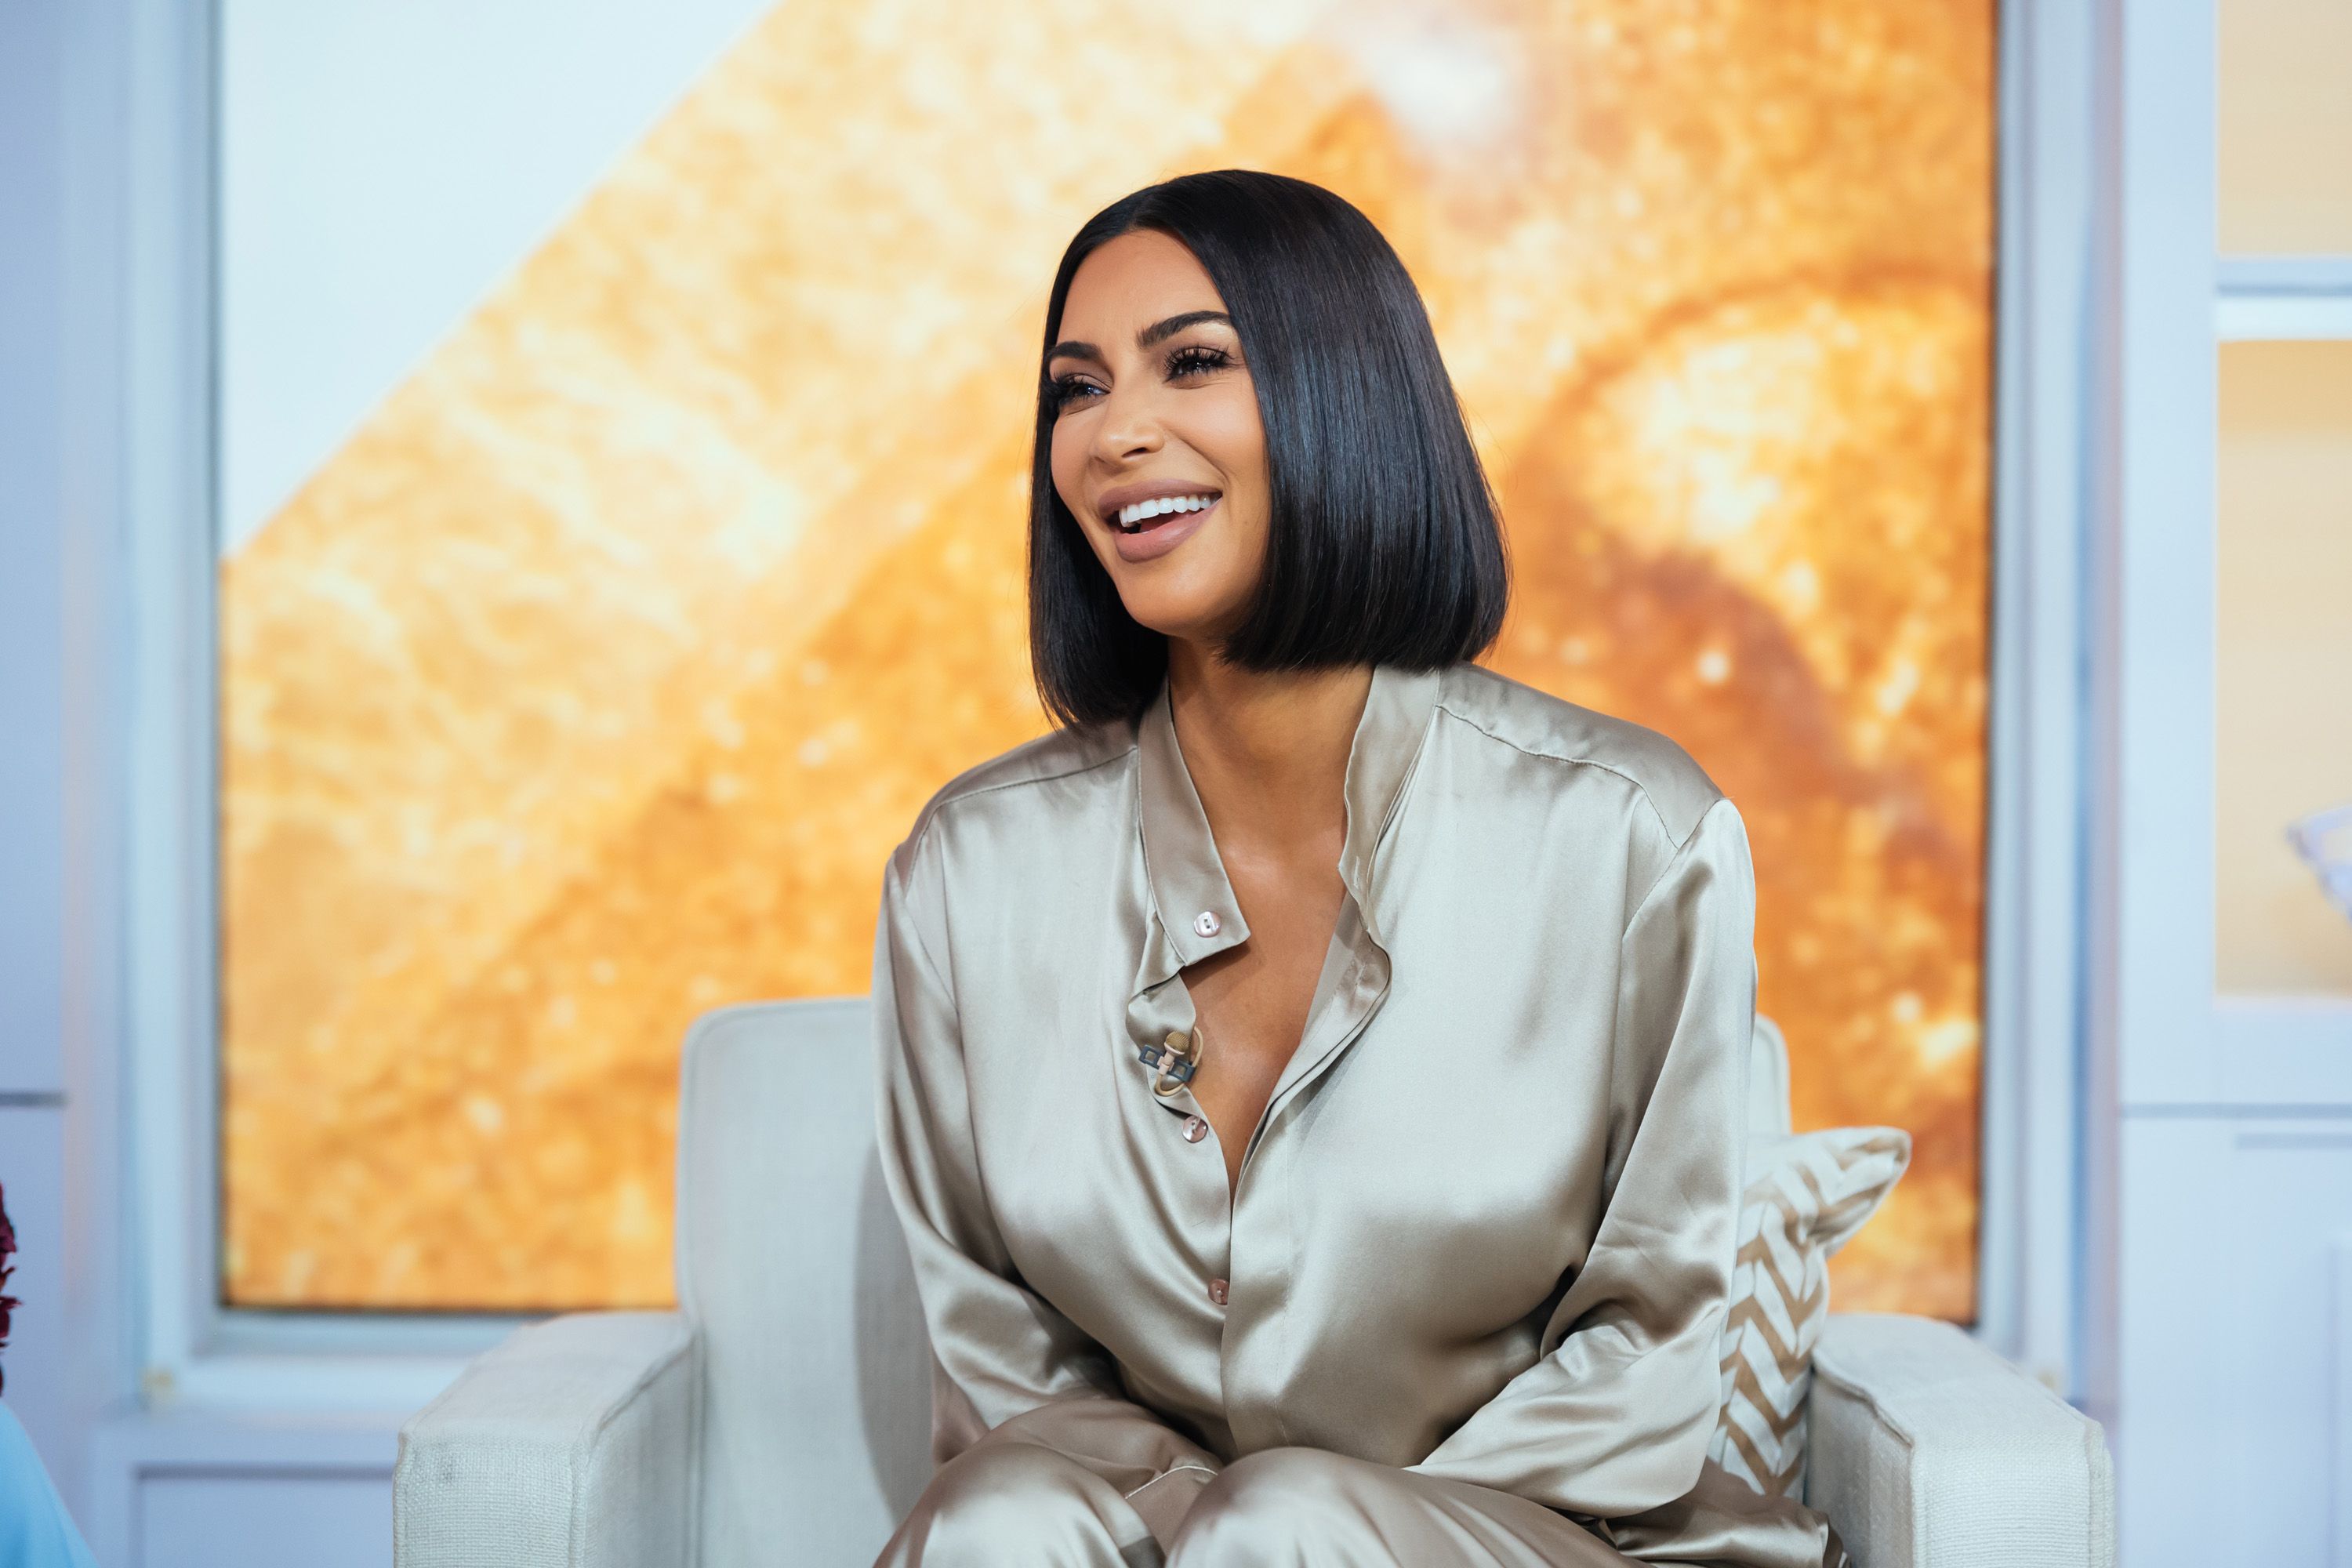 Kim Kardashian West on the set of "Today" Season 68 on September 10, 2019. | Source: Getty Images